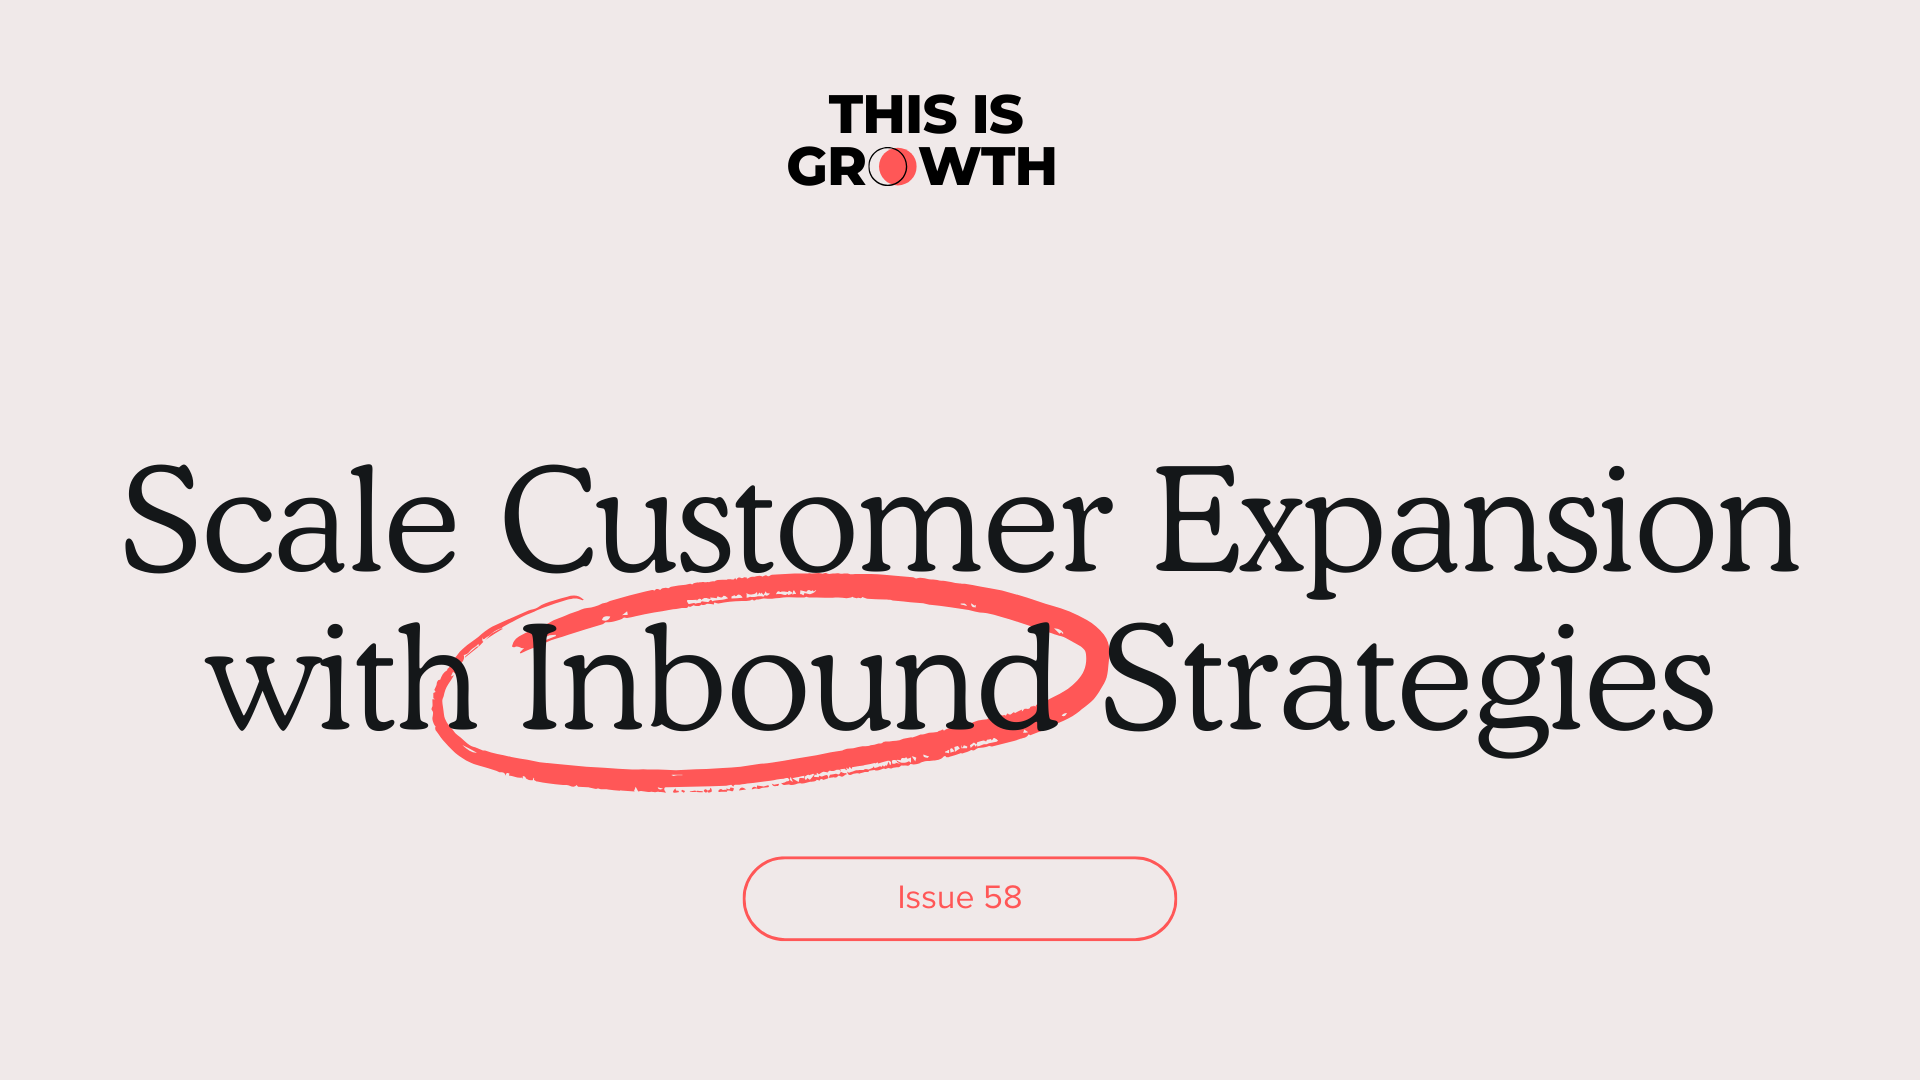 Scale Customer Expansion with Inbound Strategies